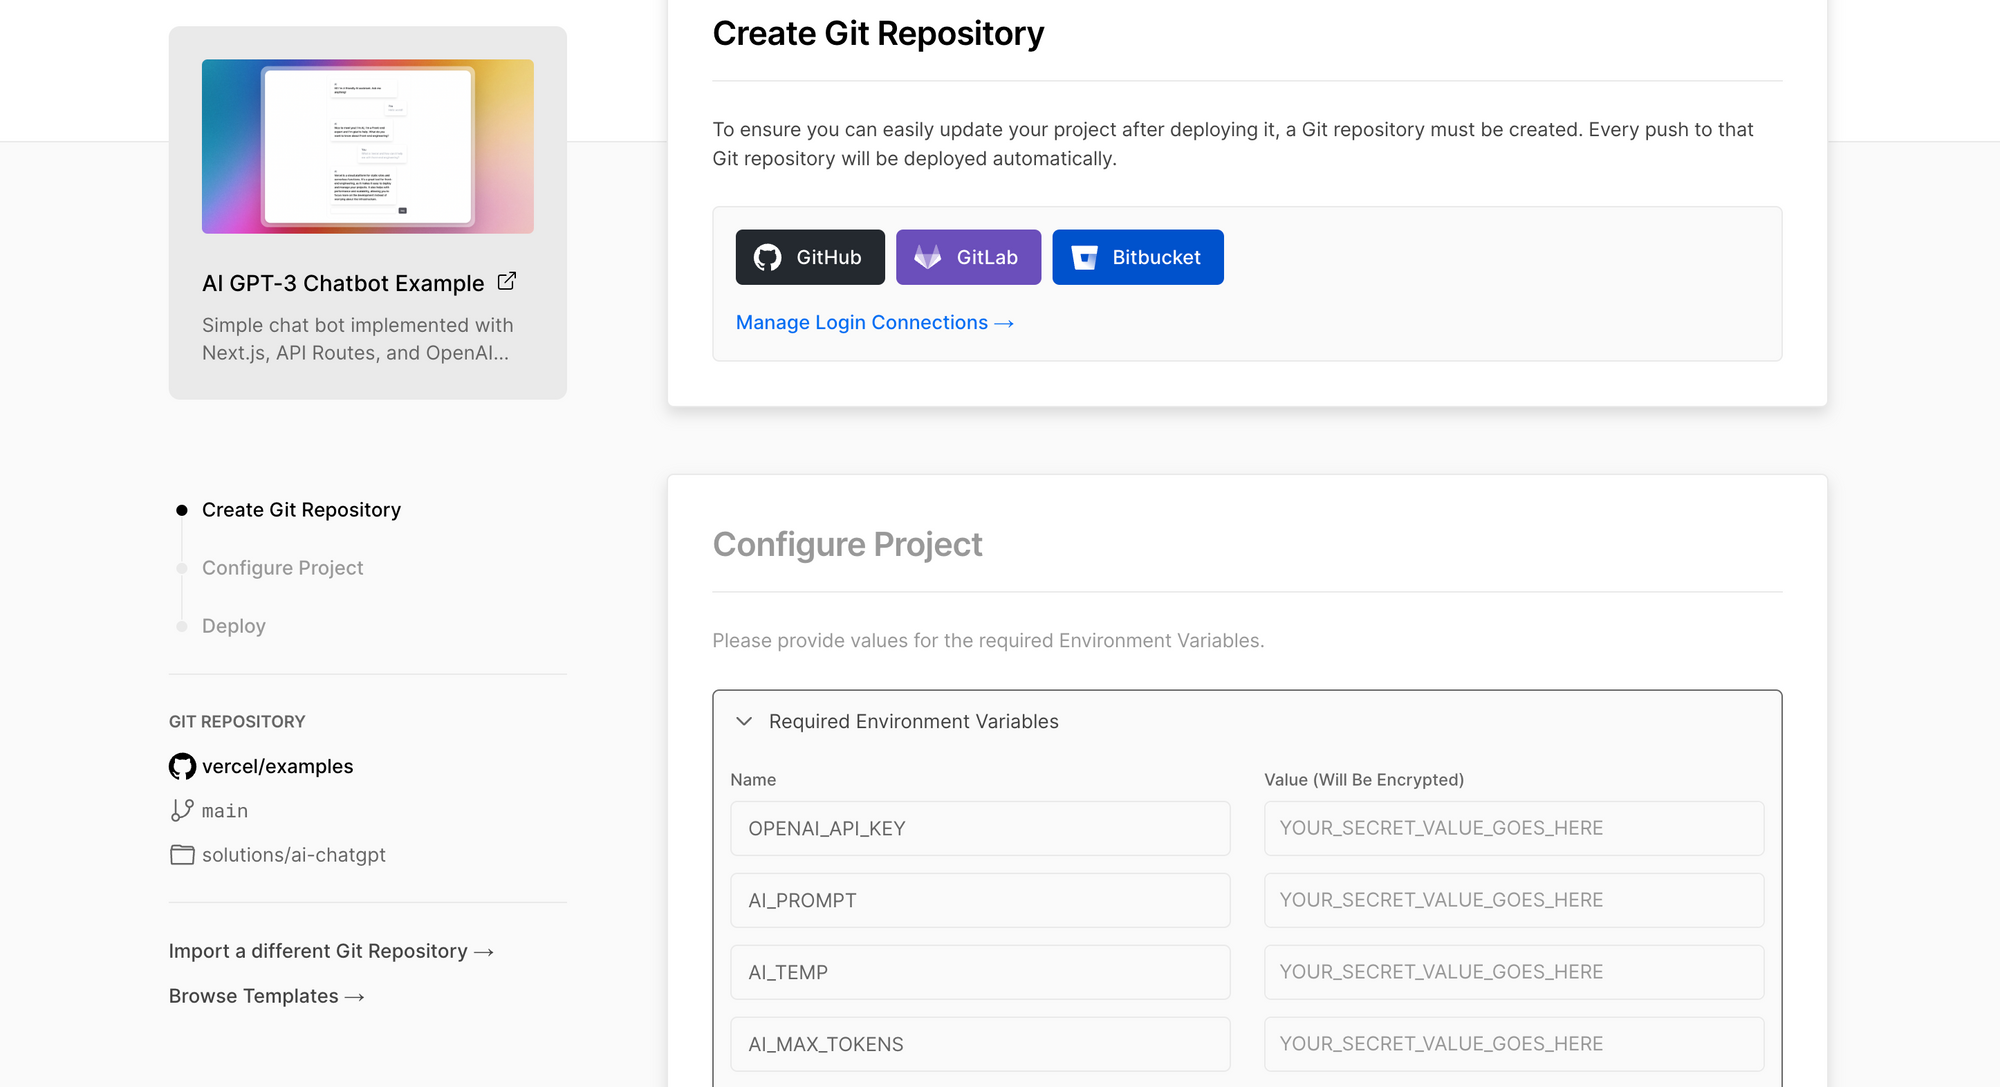 Connect and create Git repository